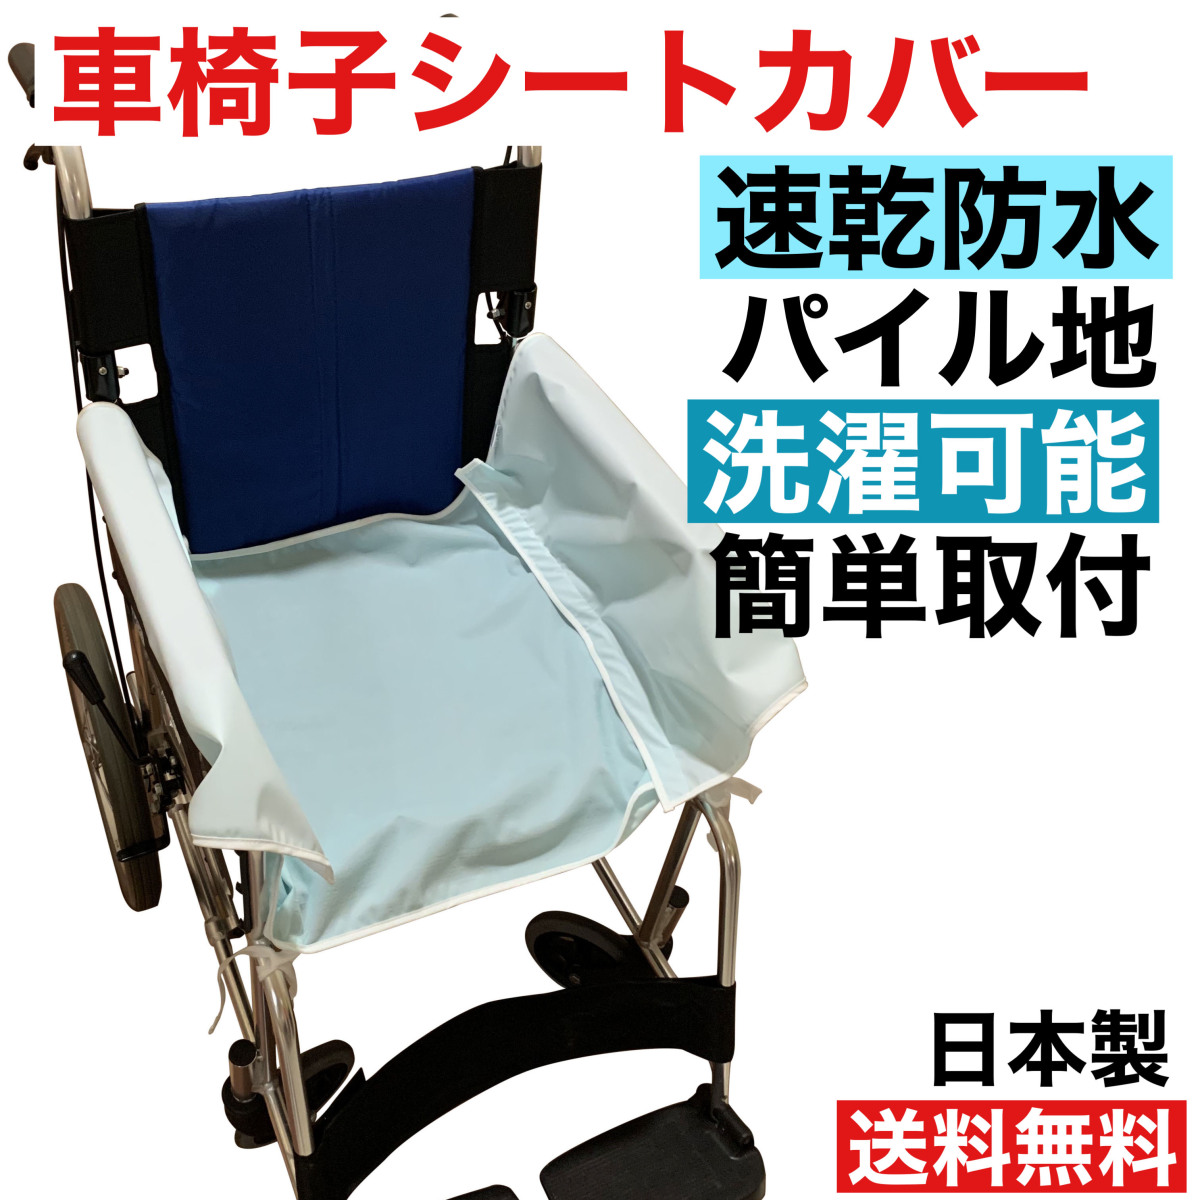  wheelchair sheet cover seat seat cover small of the back cover type nursing welfare waterproof speed .. prohibitation meal .... dirt prevention nursing facility waterproof sheet 1 sheets insertion made in Japan lita hell s